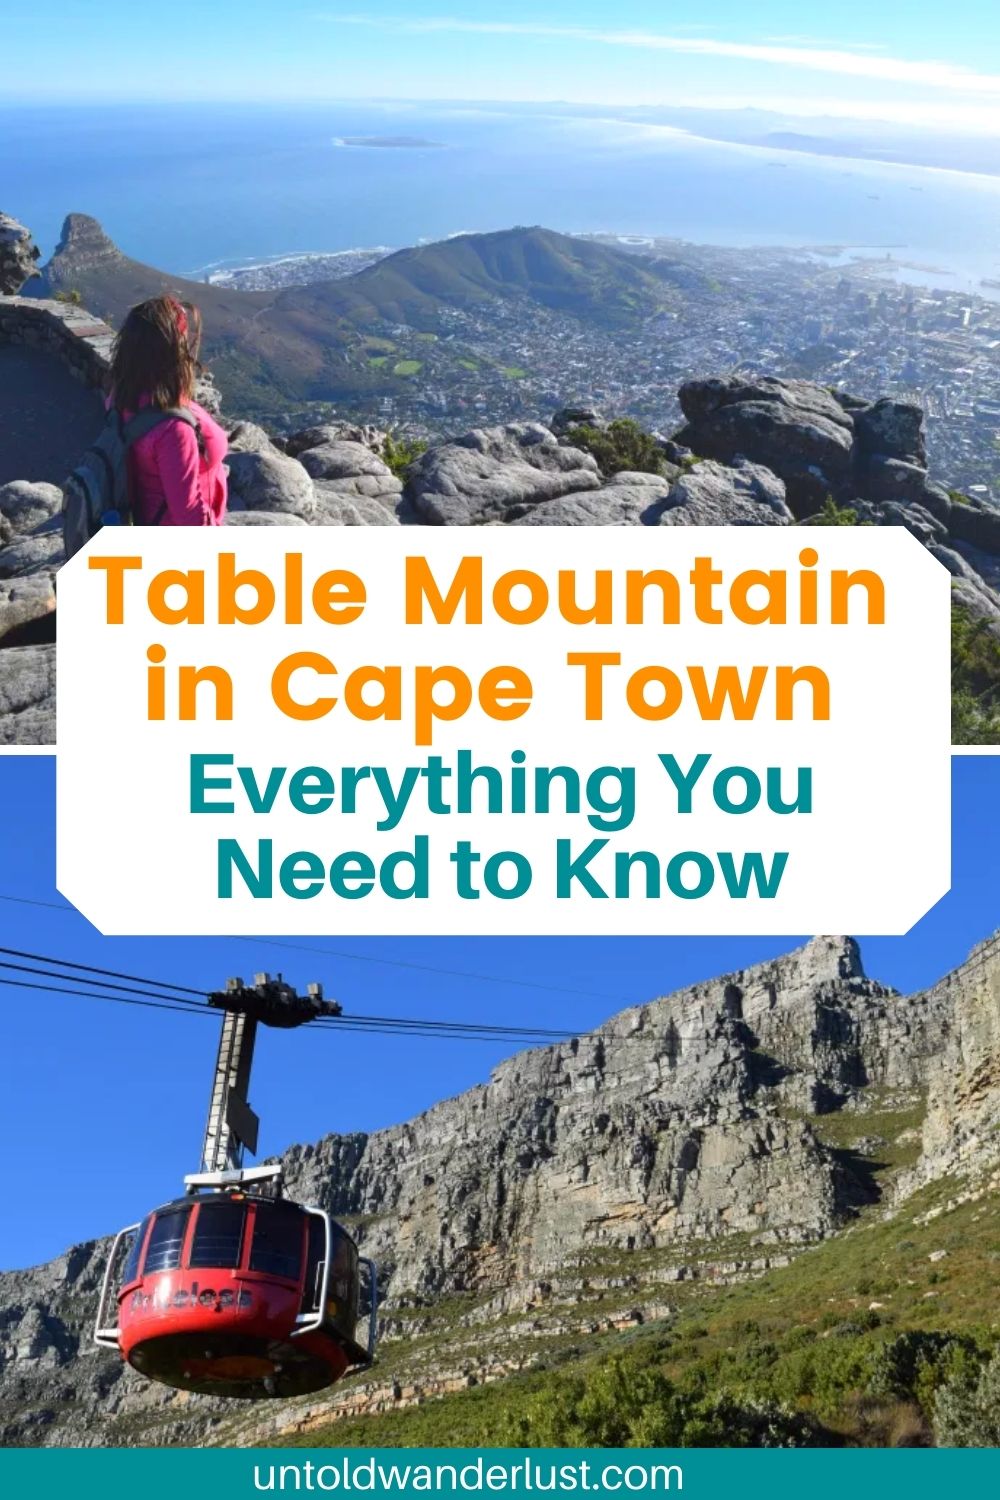 Essential Information About Table Mountain, Cape Town